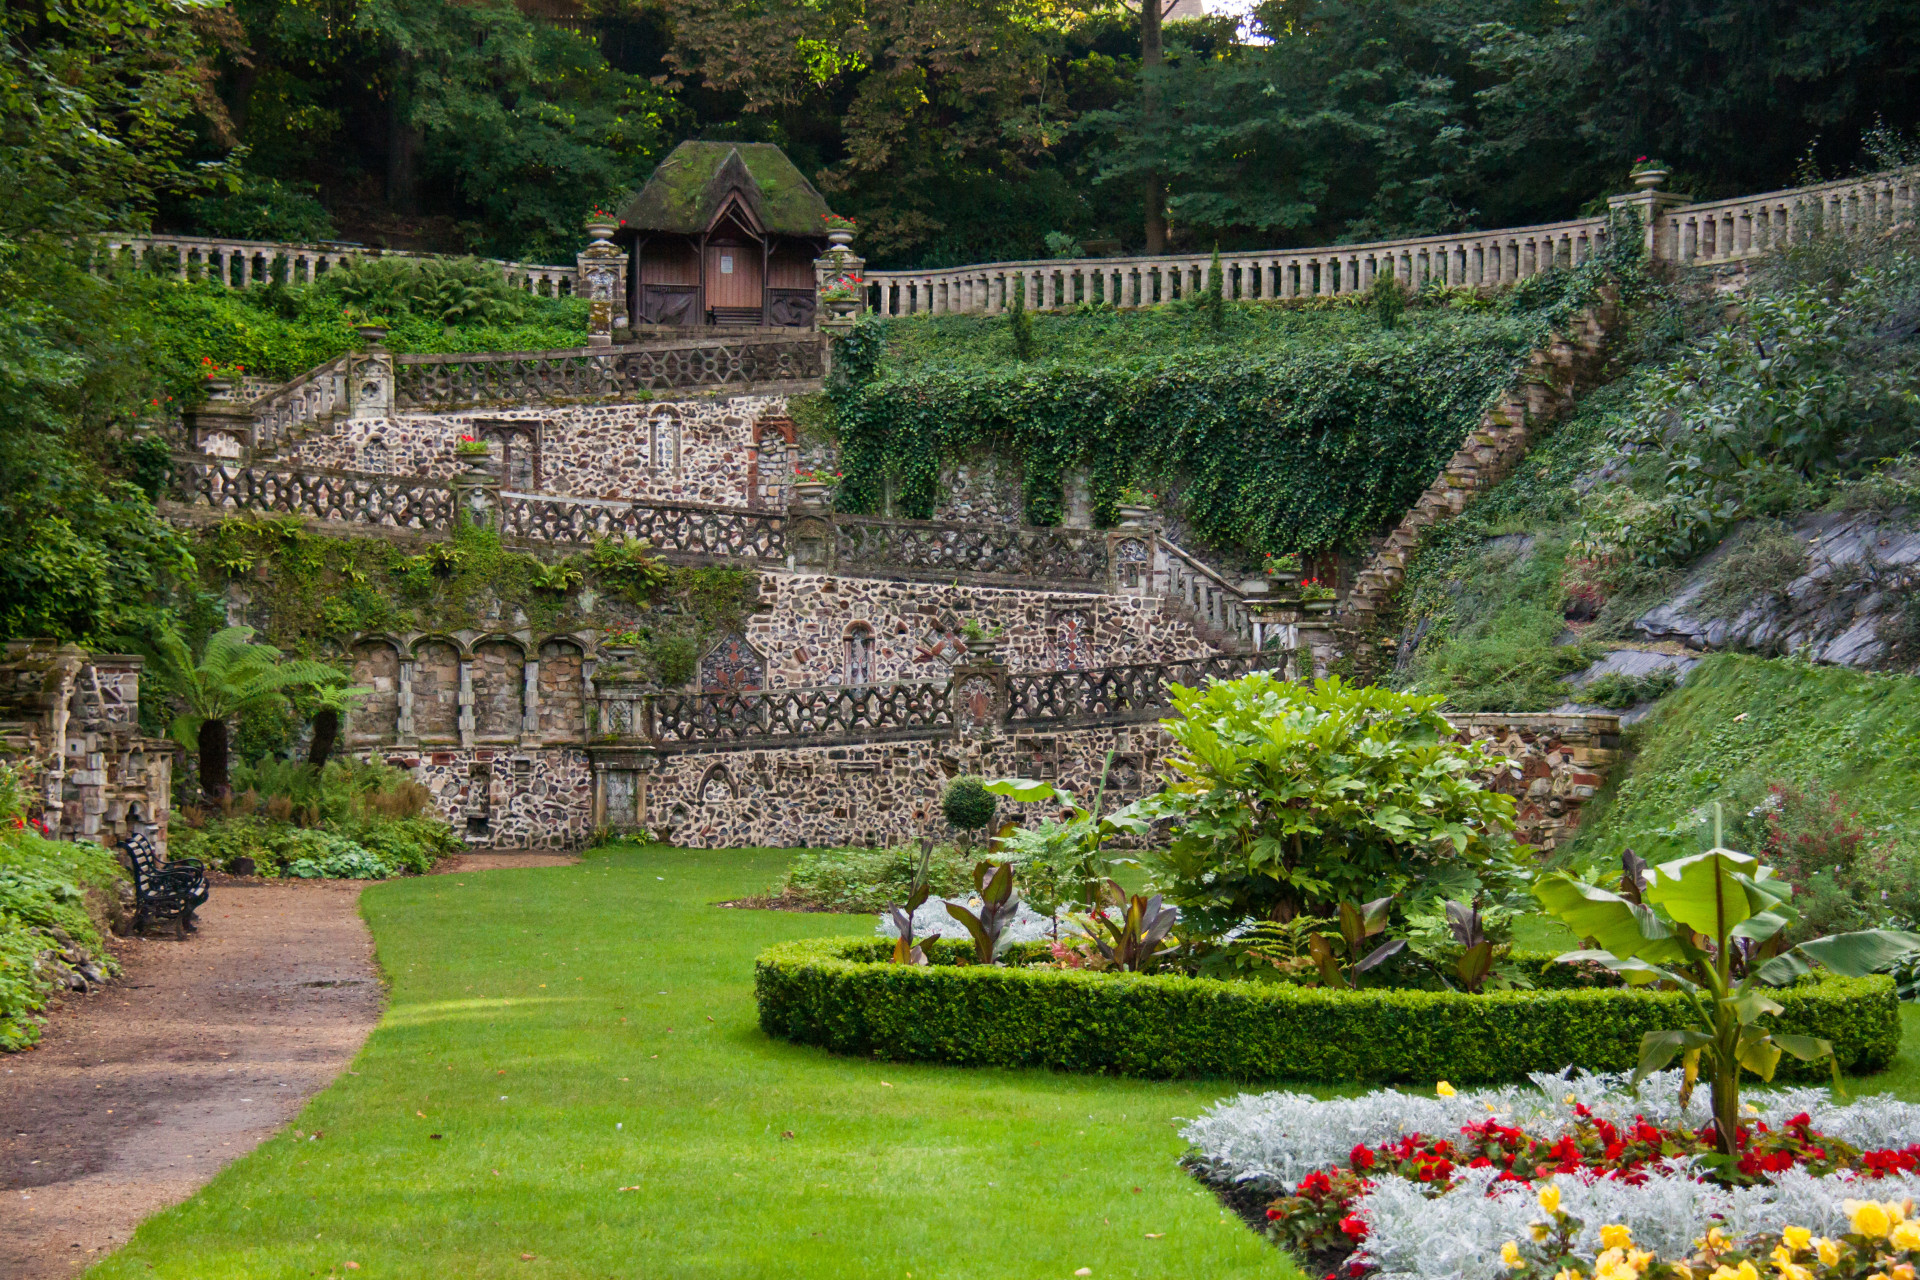 <p>The Plantation Garden in Norwich is a beautiful Victorian, Gothic-style garden in the city centre. The garden boasts flowerbeds, Gothic fountains, an Italian terrace, a cathedral, and woodlands.</p> <p>See also: <a href="https://www.starsinsider.com/travel/340942/the-beauty-of-spring-around-the-world">The beauty of spring around the world</a></p><p><a href="https://www.msn.com/en-us/community/channel/vid-7xx8mnucu55yw63we9va2gwr7uihbxwc68fxqp25x6tg4ftibpra?cvid=94631541bc0f4f89bfd59158d696ad7e">Follow us and access great exclusive content every day</a></p>